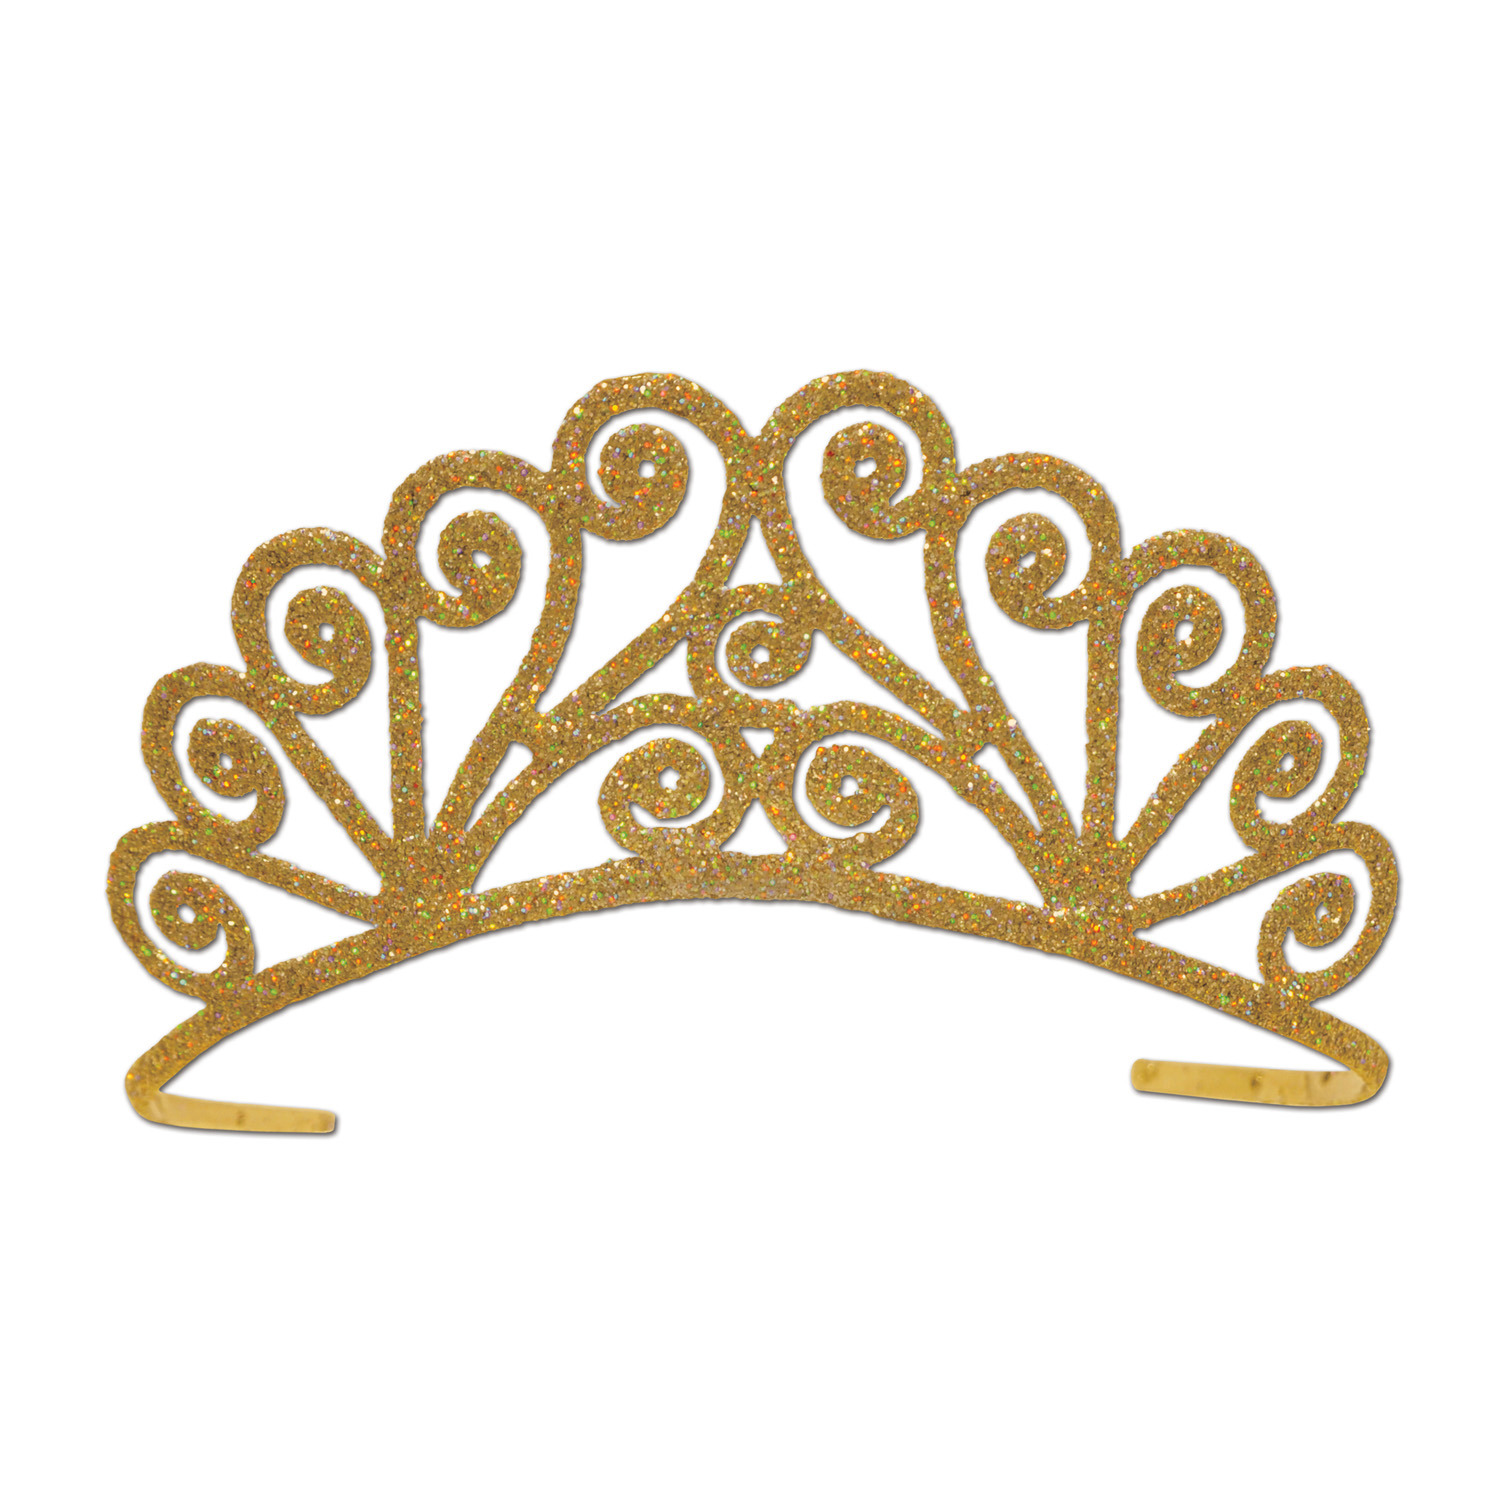 Gold plastic tiara covered in glitter with a swirly design.